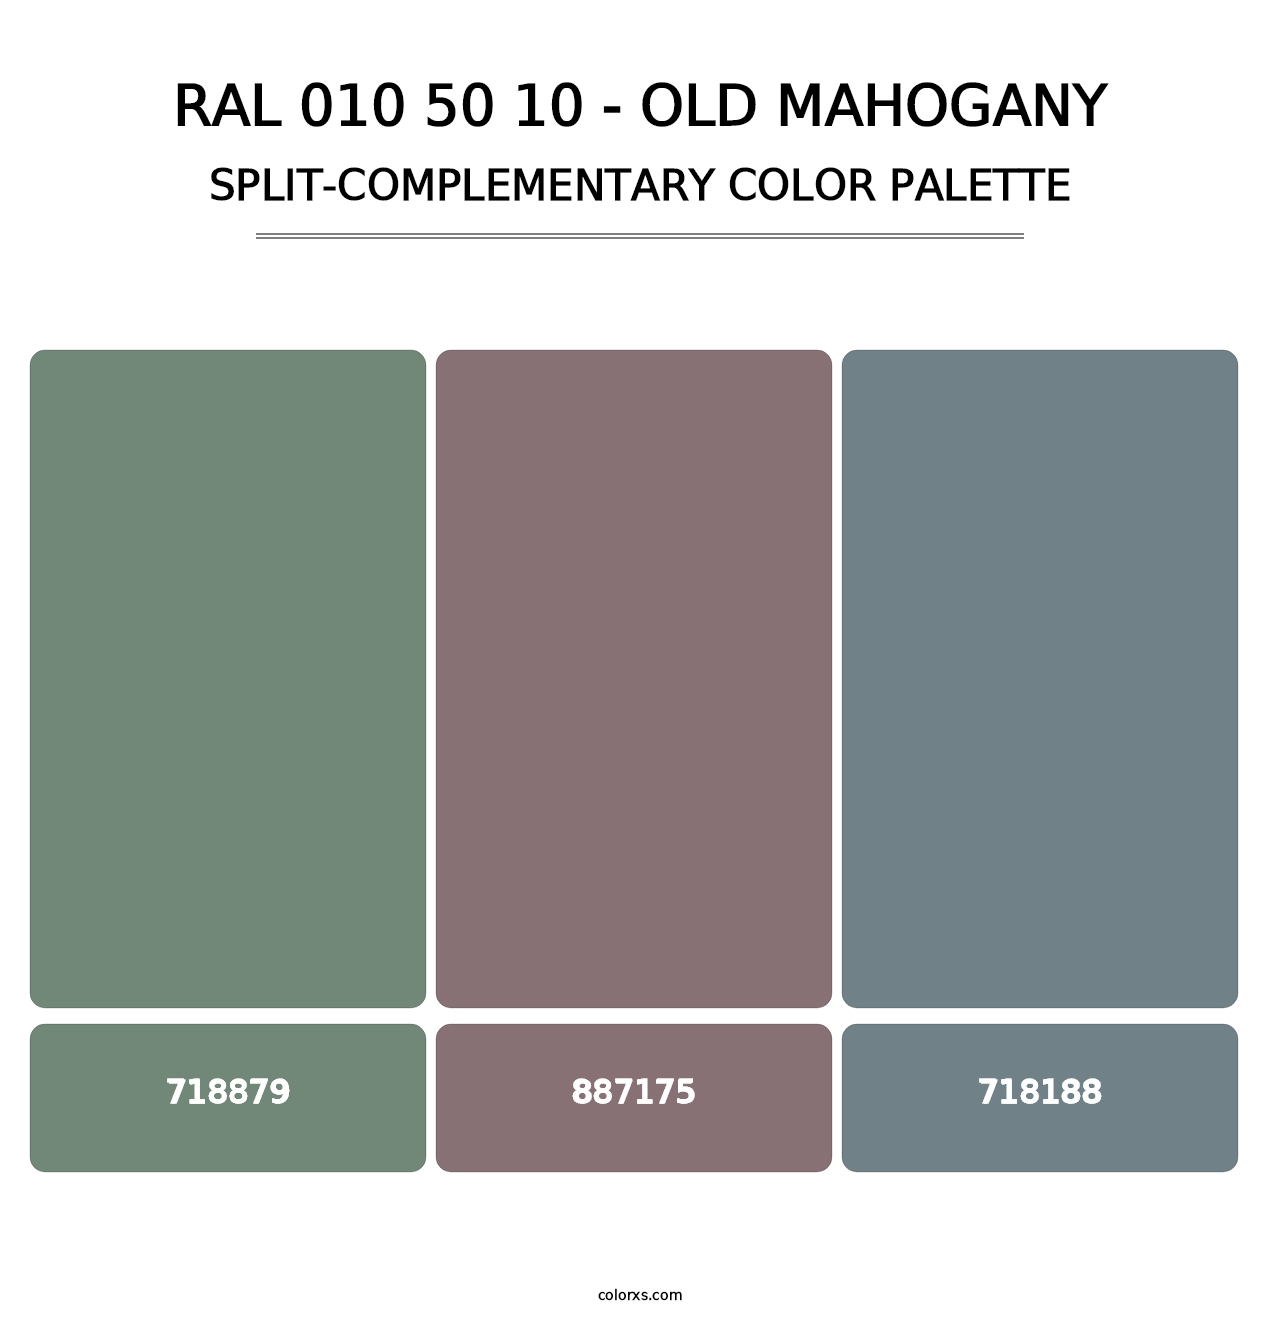 RAL 010 50 10 - Old Mahogany - Split-Complementary Color Palette